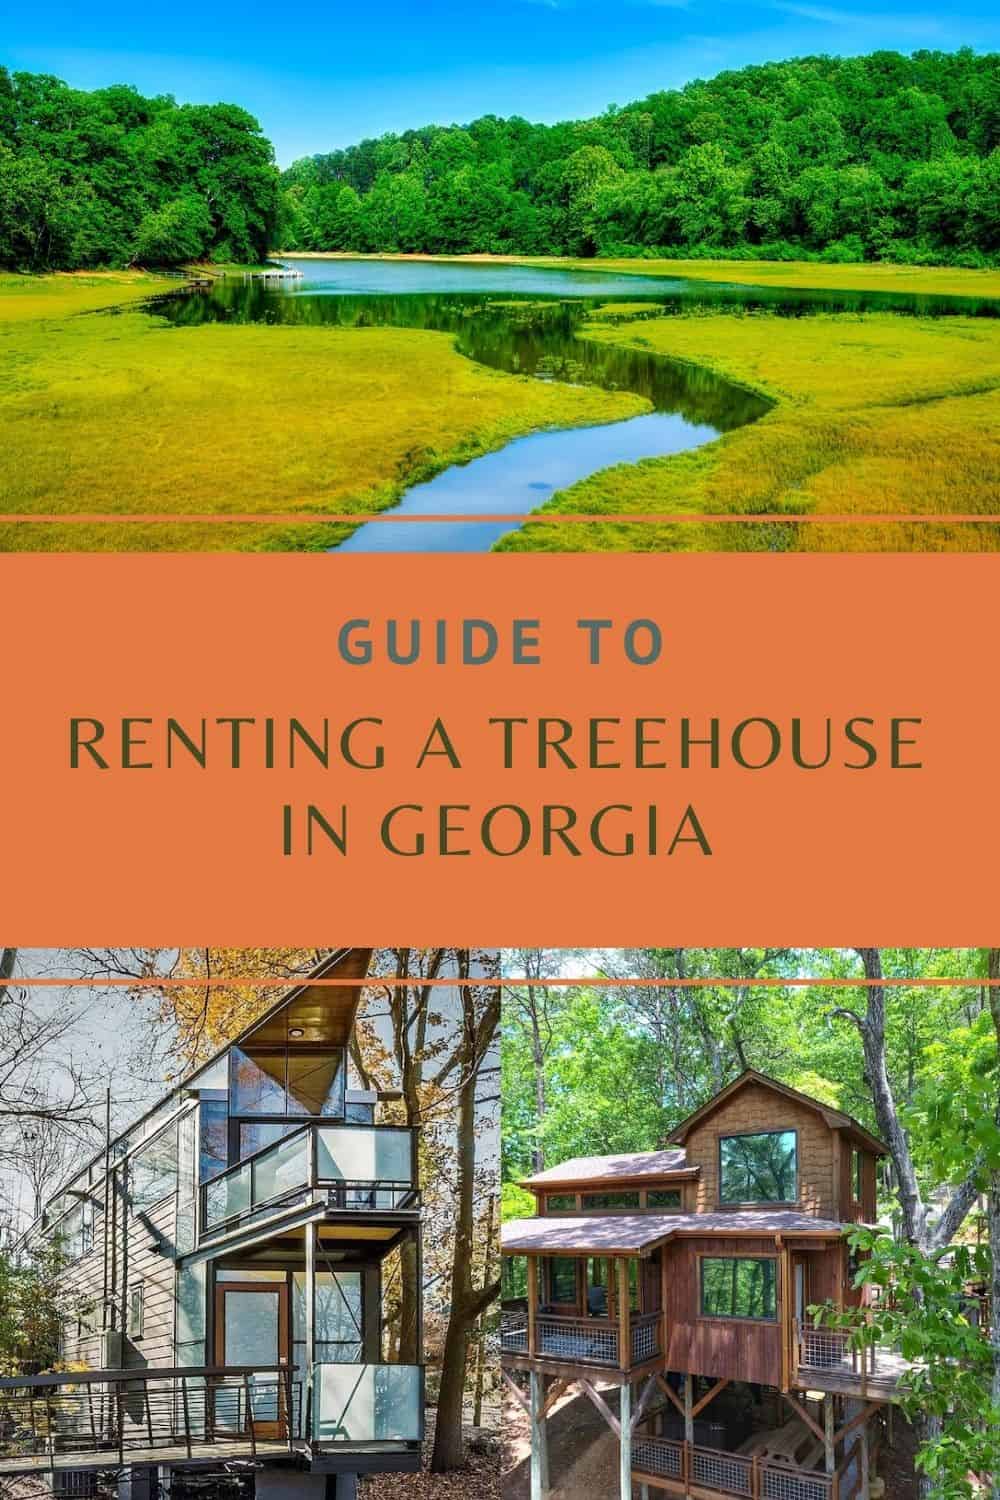 Looking for Treehouses in Georgia? Check out our Treehouses Georgia Rentals Guide and book the perfect Georgia Treehouse for your next trip!